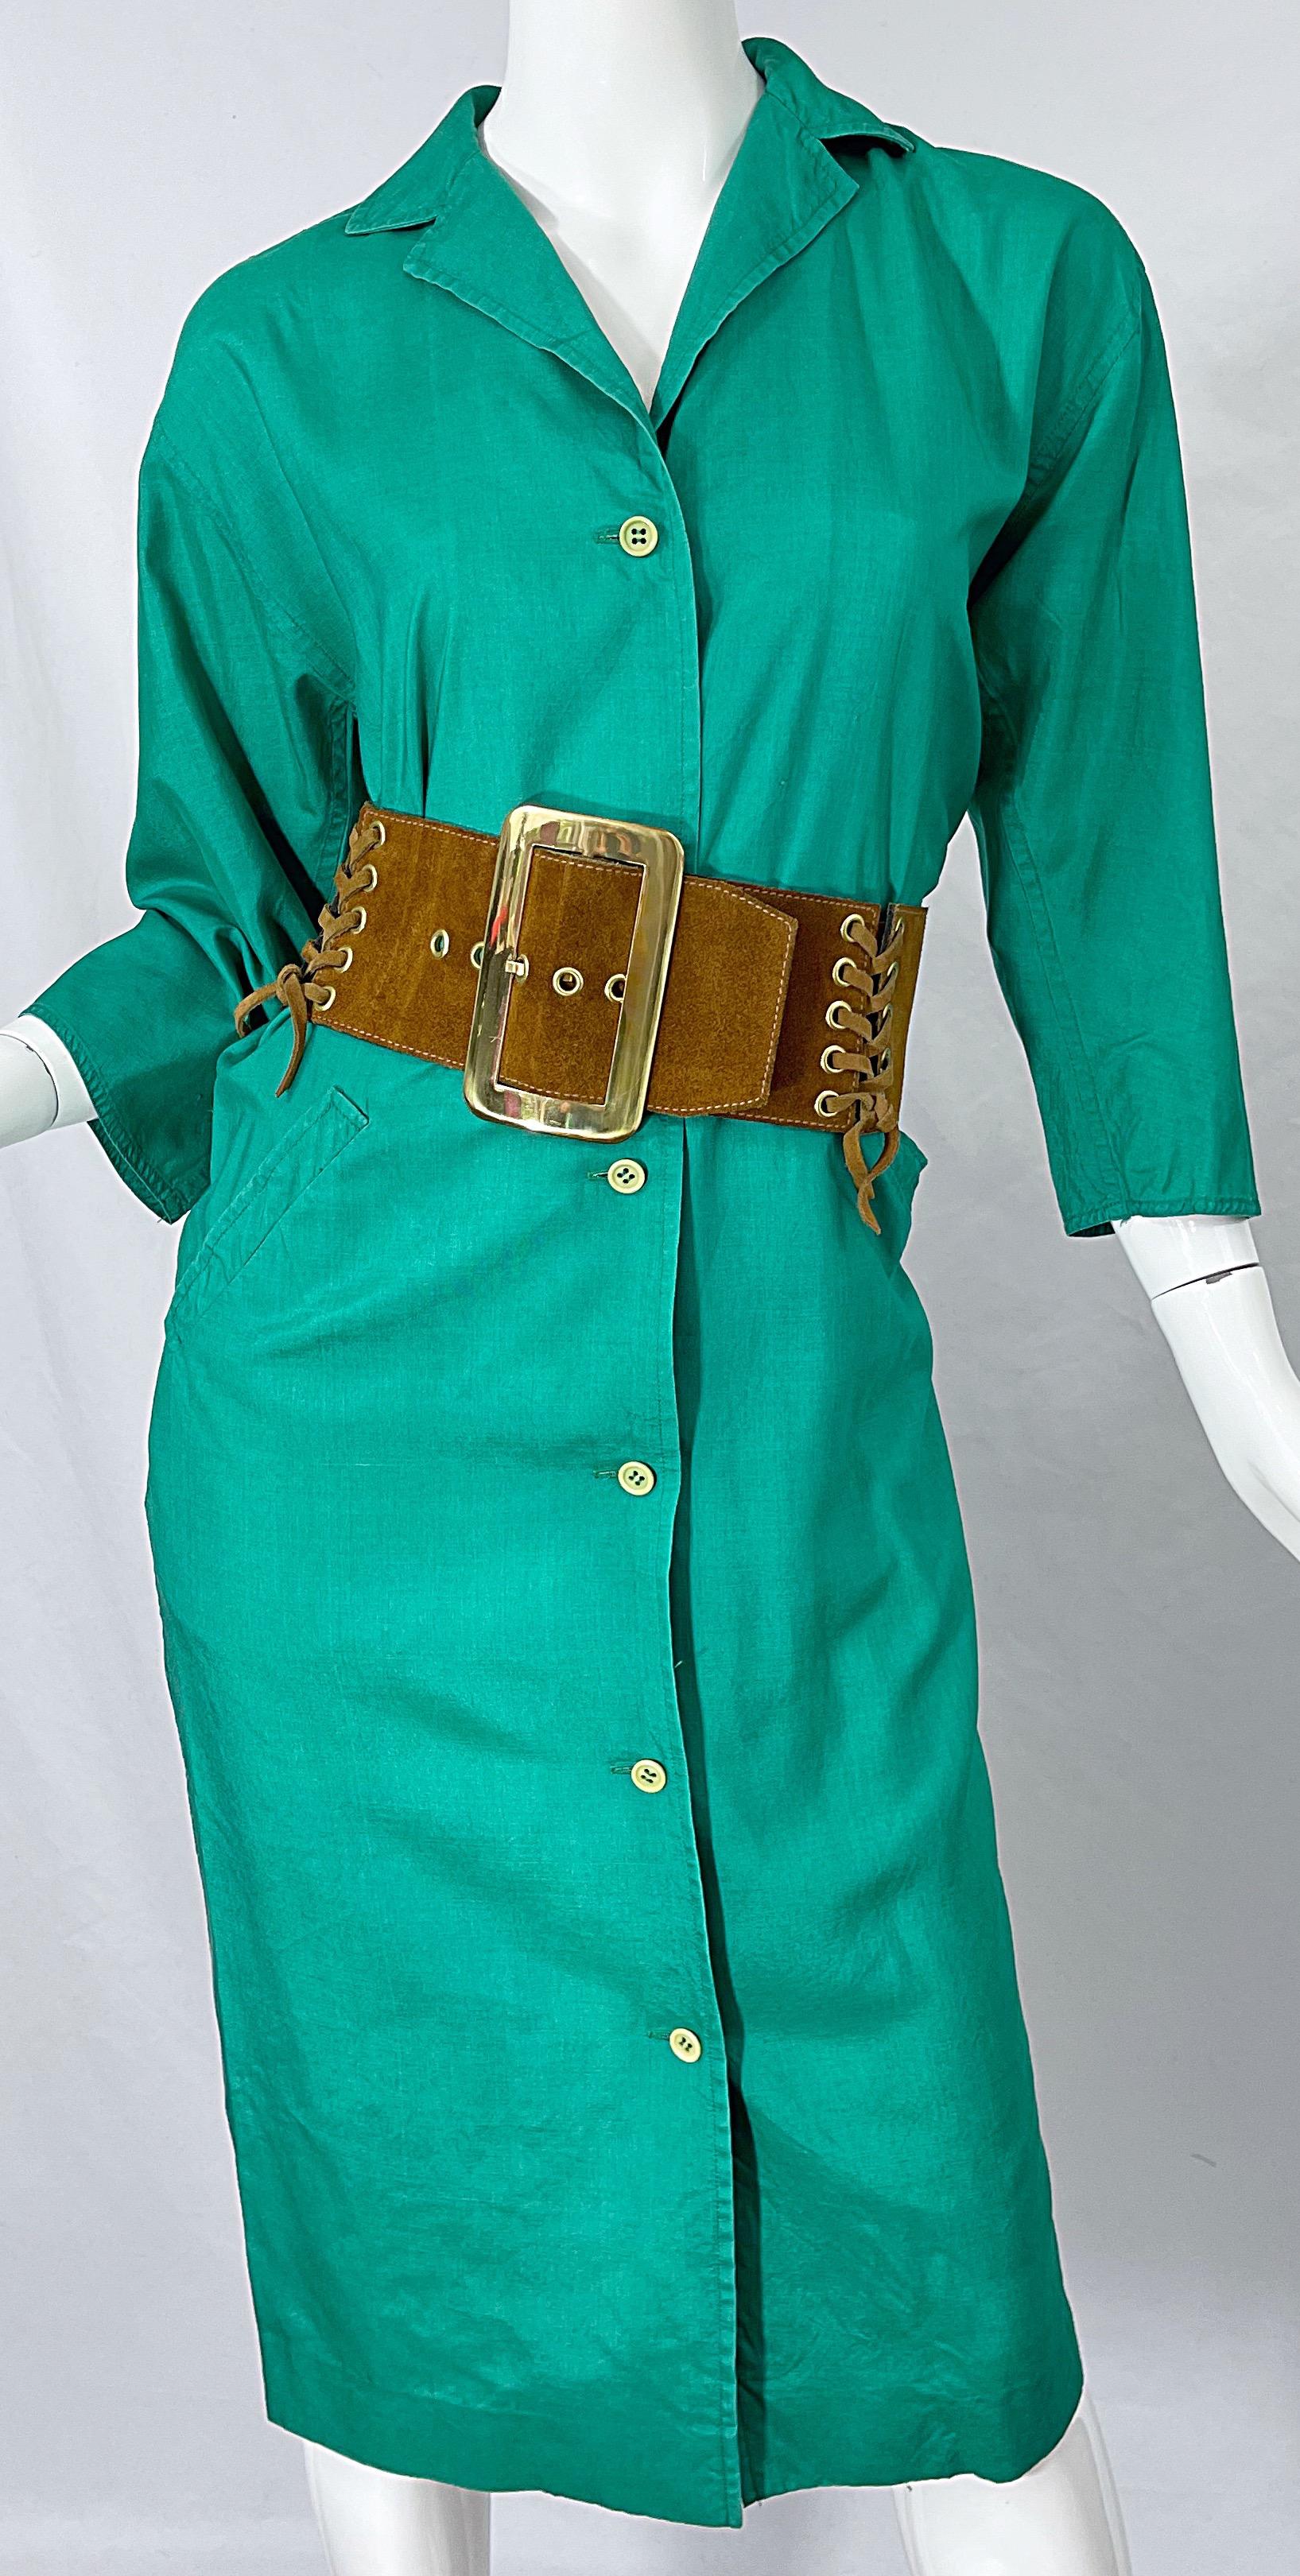 1970s Halston Kelly Green Silk 3/4 Sleeves Vintage 70s Shirt Dress w/ Pockets For Sale 6